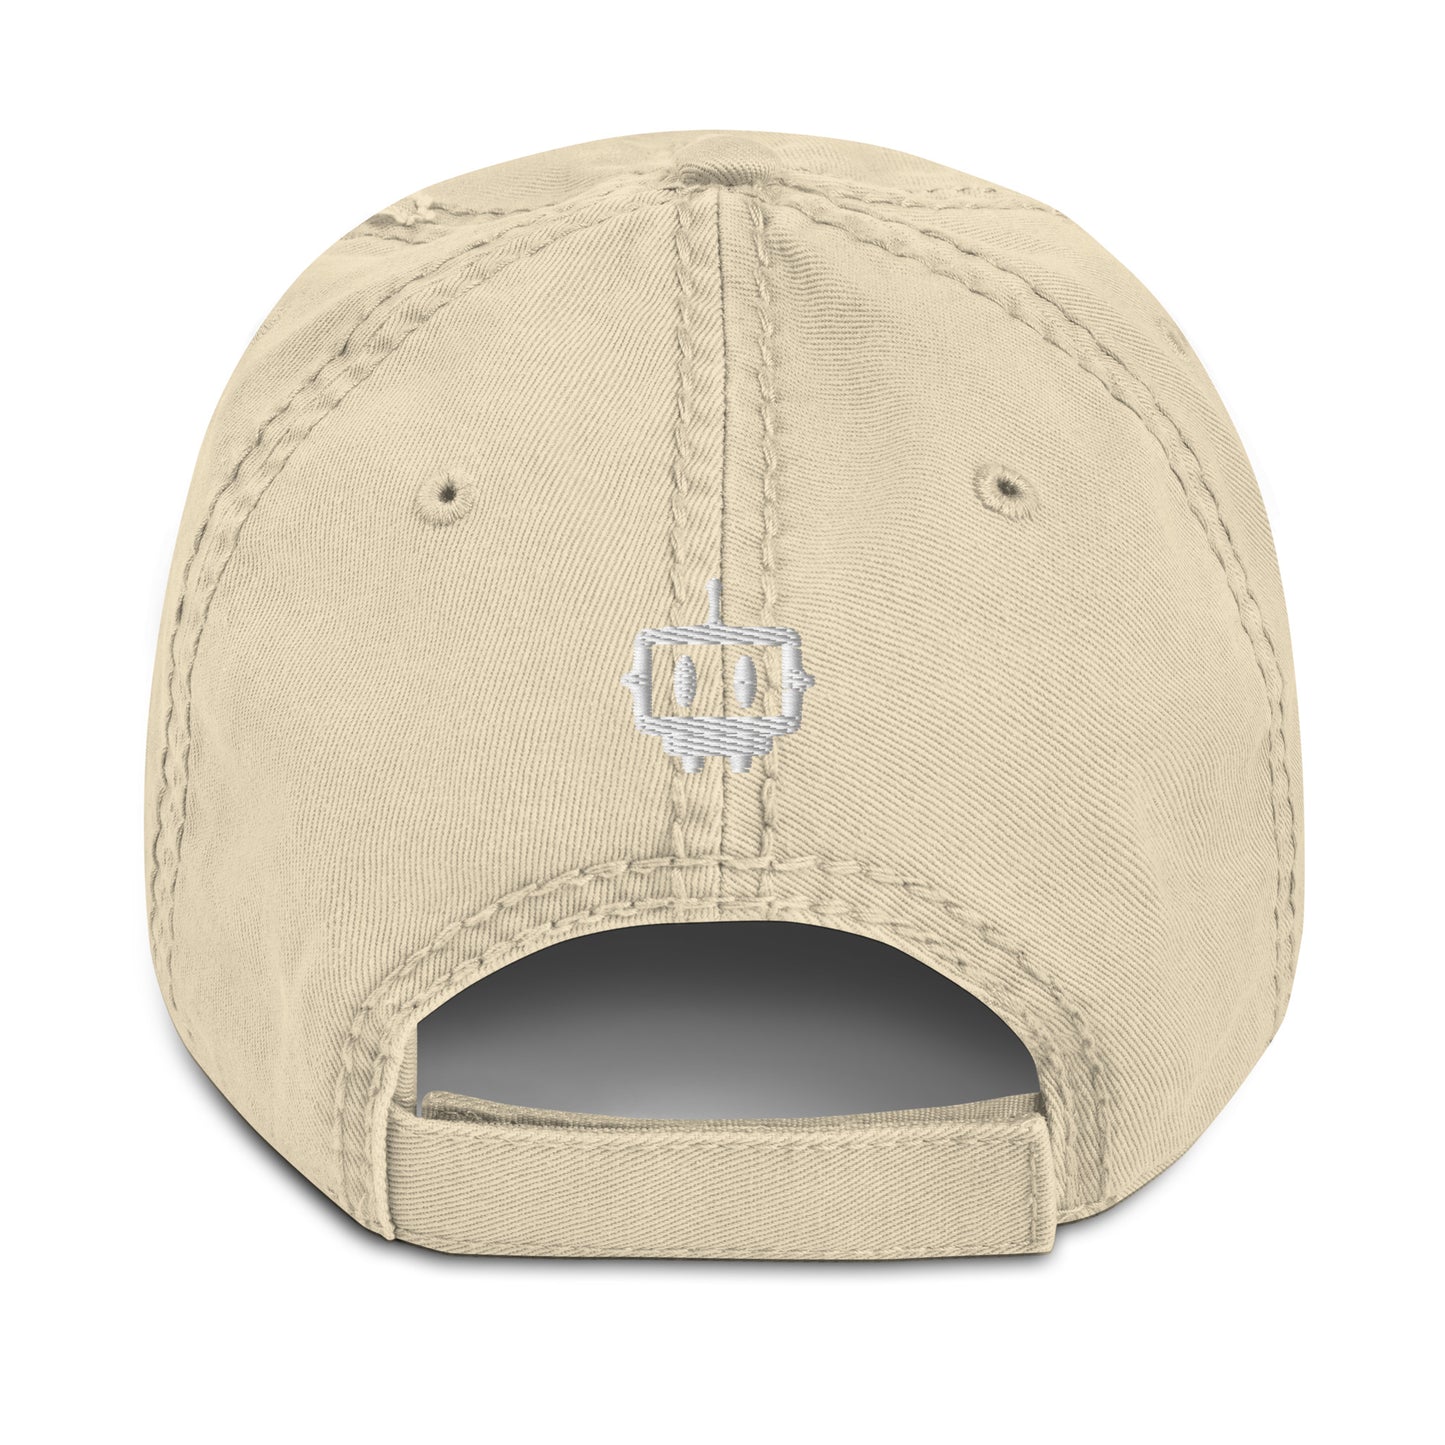 Check Bulb - Distressed Dad Hat